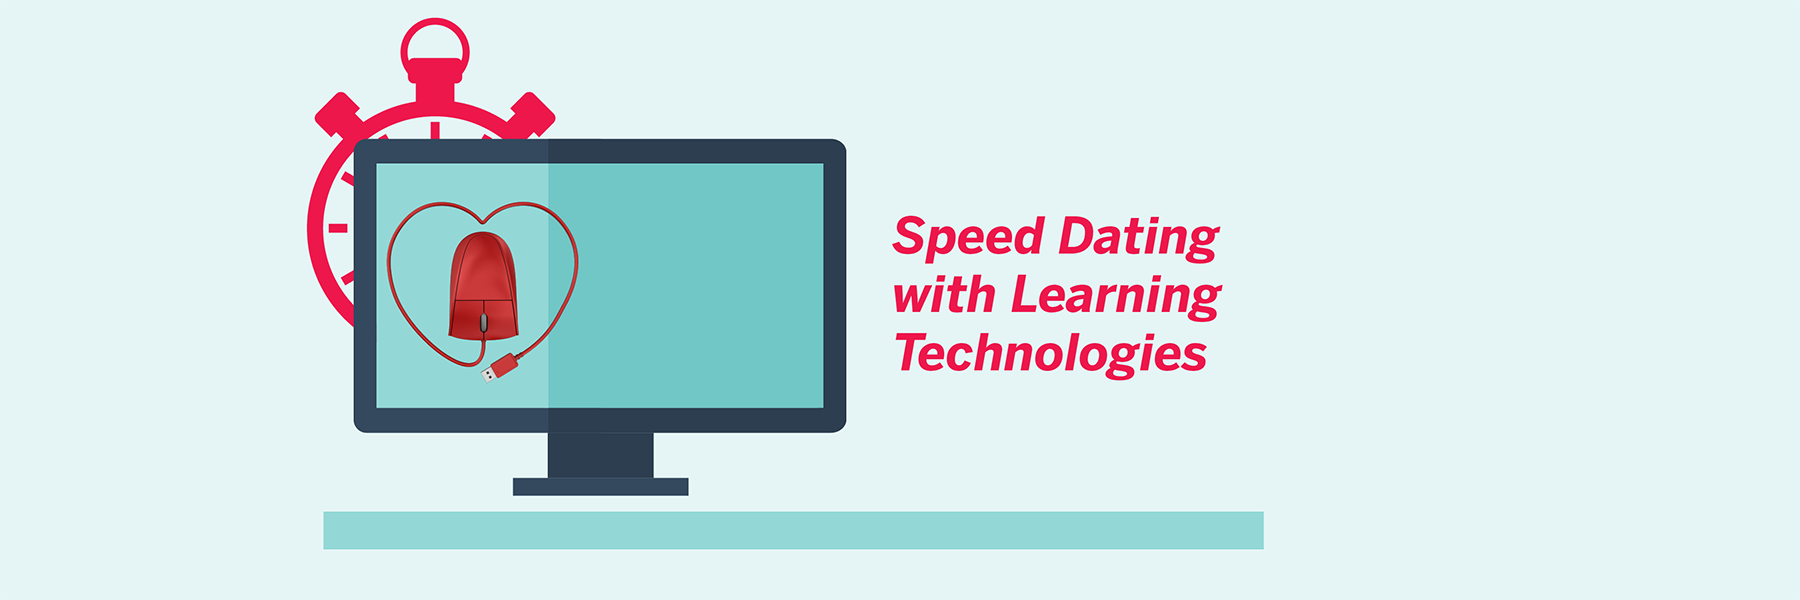 Speed Dating for Learning Technologies.